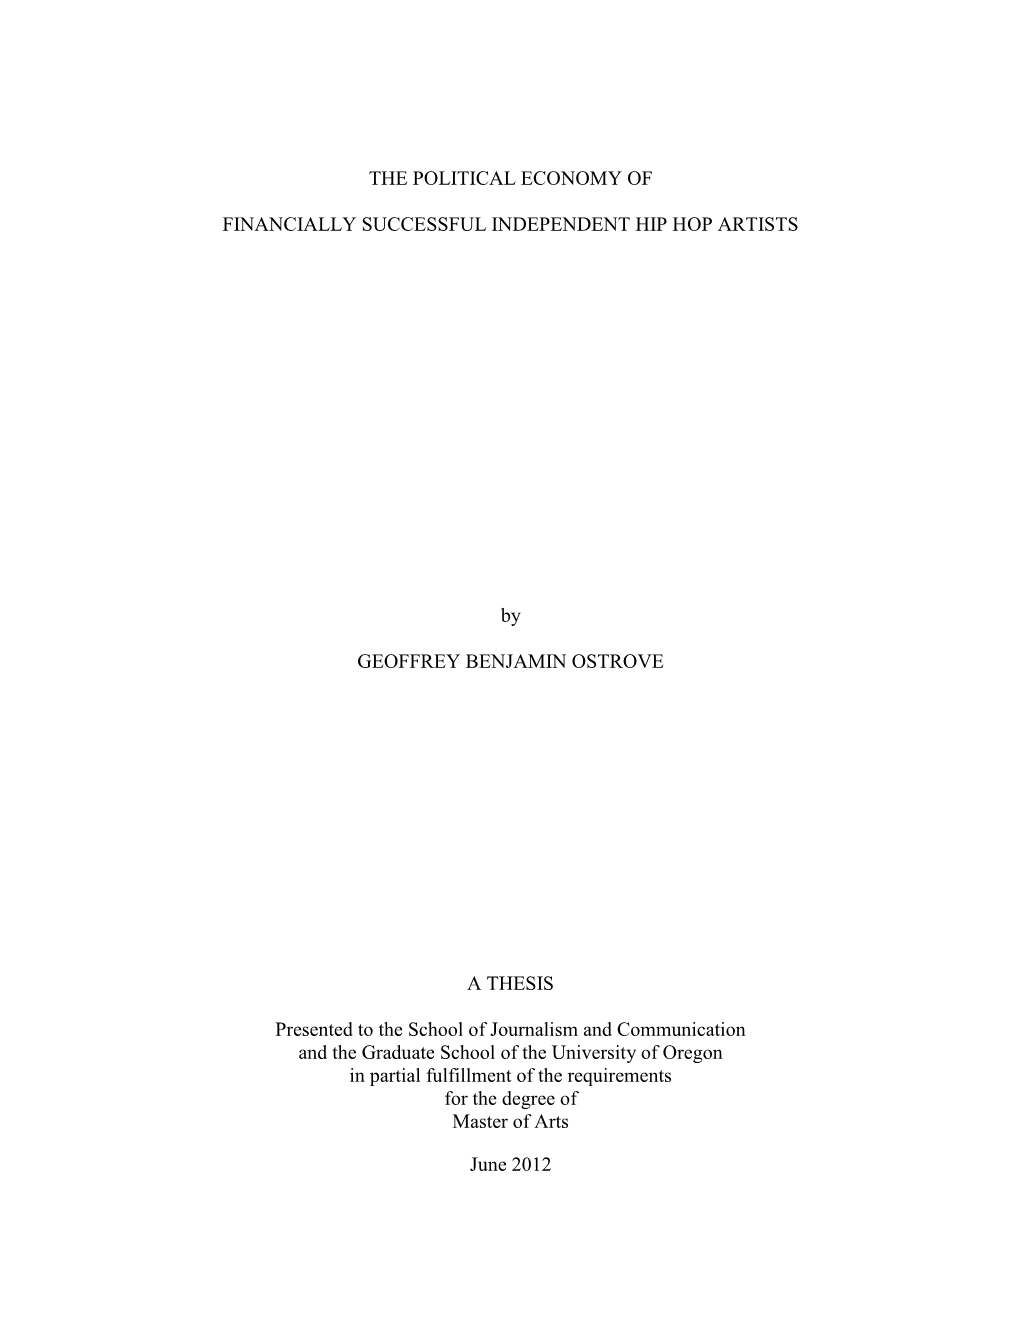 THE POLITICAL ECONOMY of FINANCIALLY SUCCESSFUL INDEPENDENT HIP HOP ARTISTS by GEOFFREY BENJAMIN OSTROVE a THESIS Presented To